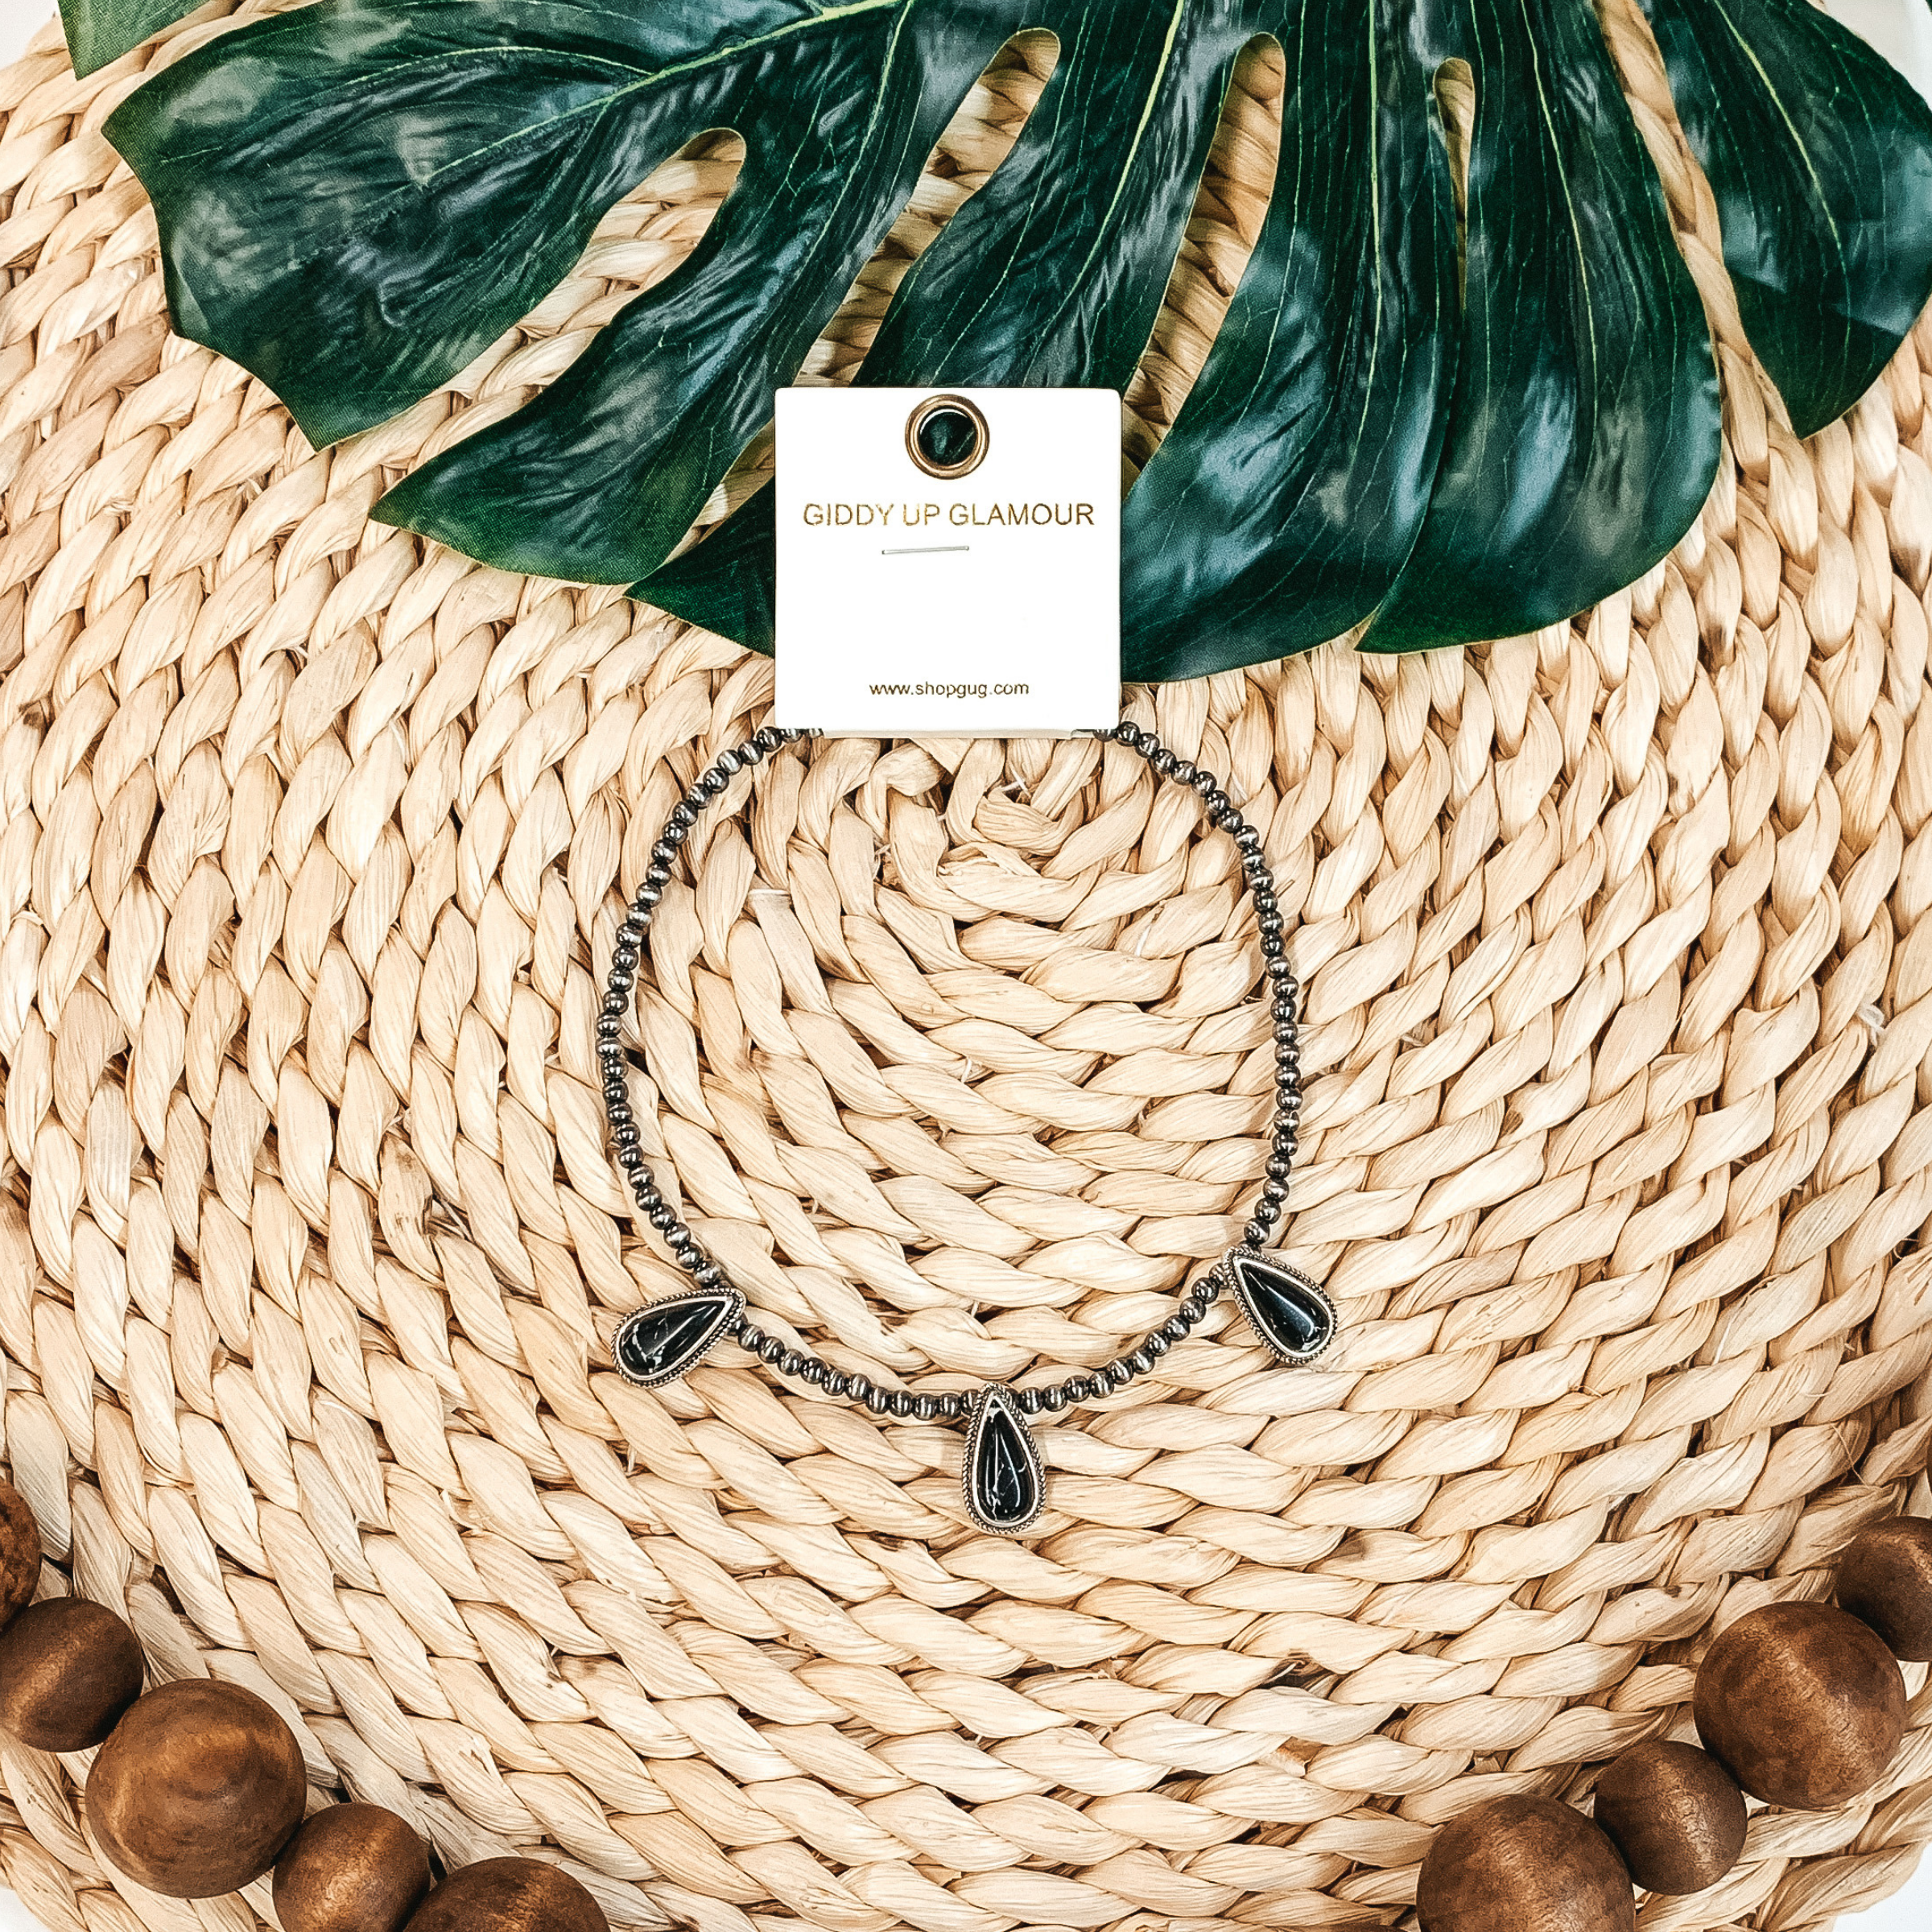 Silver beaded necklace with three black, teardrop stone charms. This necklace is pictured on a tan basket weave with a green leaf in the background.